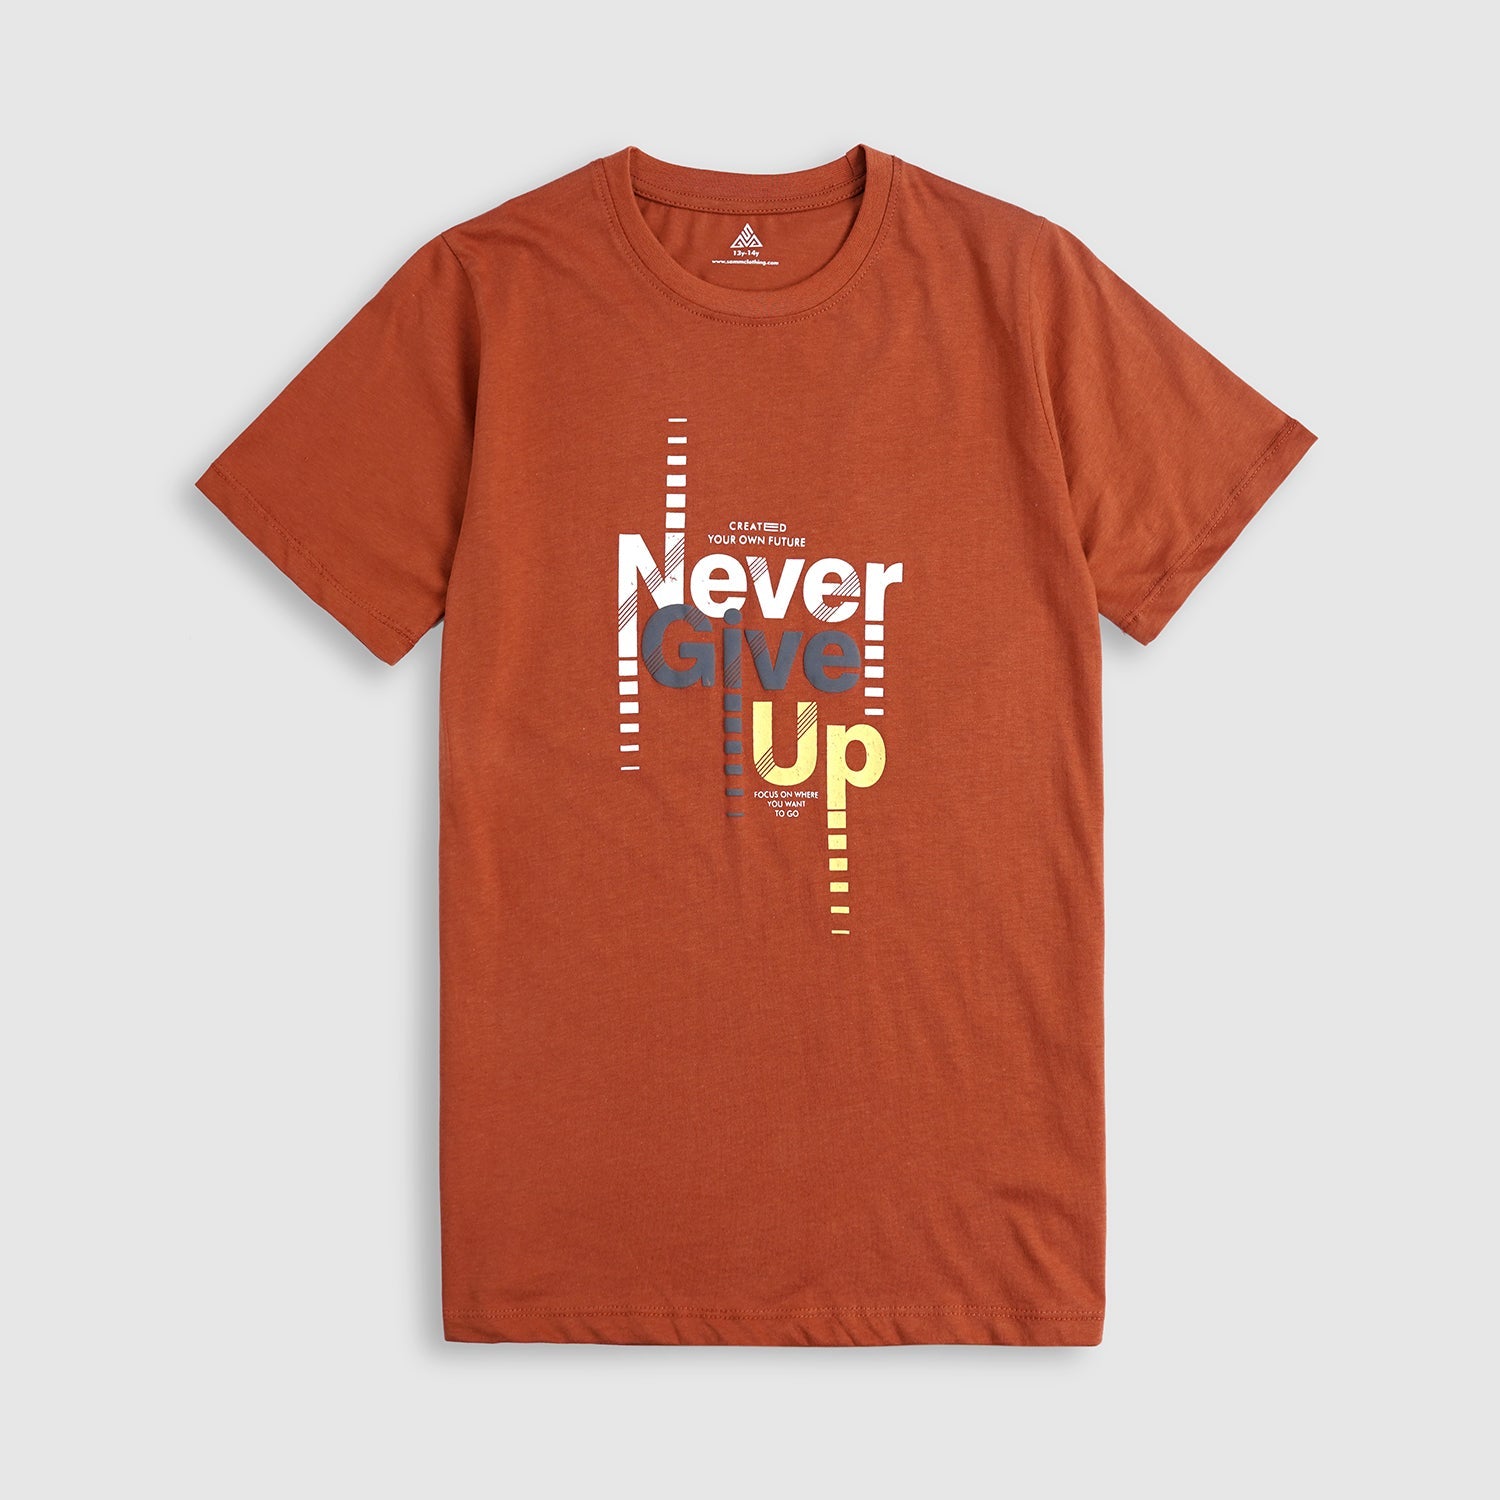 Pure Cotton "Never Give up " Graphic Print Crew Neck T-Shirt